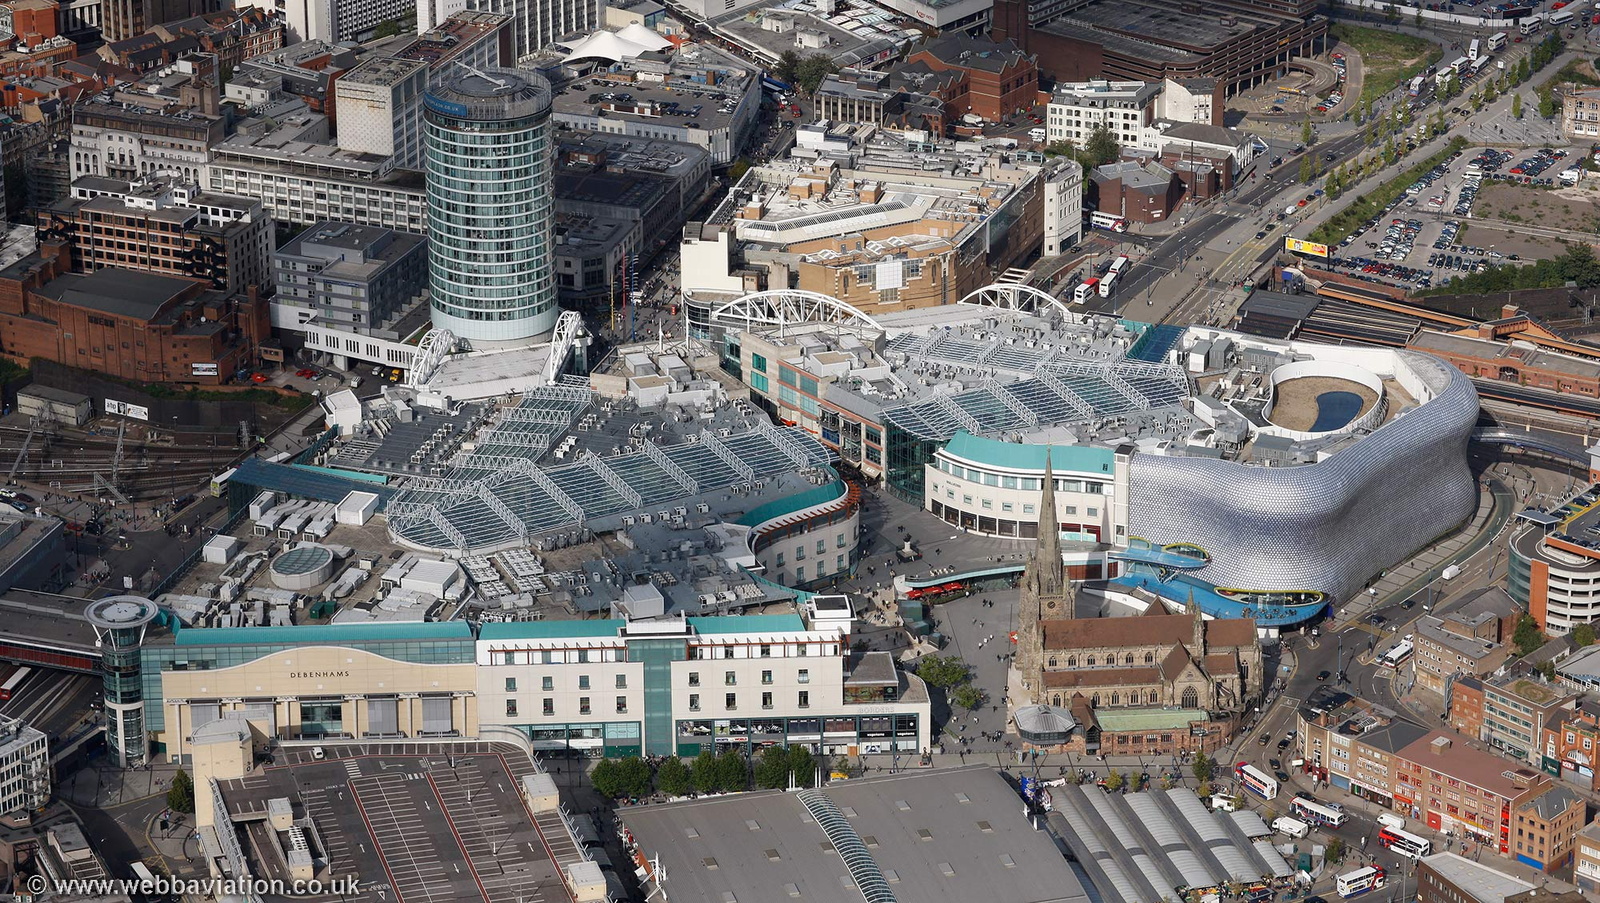 The Bullring shopping centre Birmingham from the air